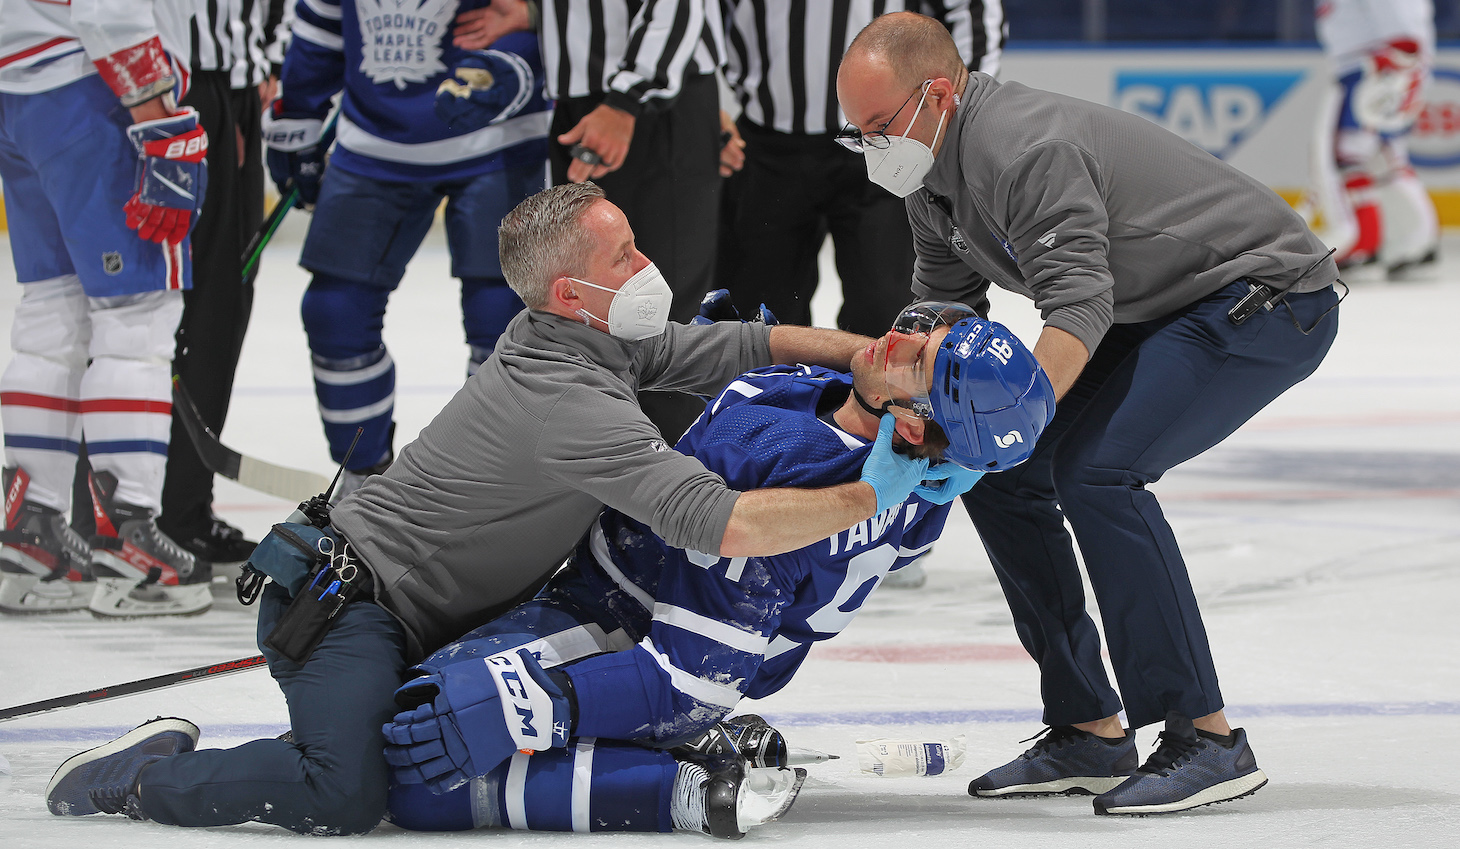 TORONTO, ON - MAY 20: John Tavares #91 of the Toronto Maple Leafs appears to suffer a significant injury against the Montreal Canadiens in Game One of the First Round of the 2021 Stanley Cup Playoffs at Scotiabank Arena on May 20, 2021 in Toronto, Ontario, Canada. (Photo by Claus Andersen/Getty Images) *** Local Caption *** John Tavares